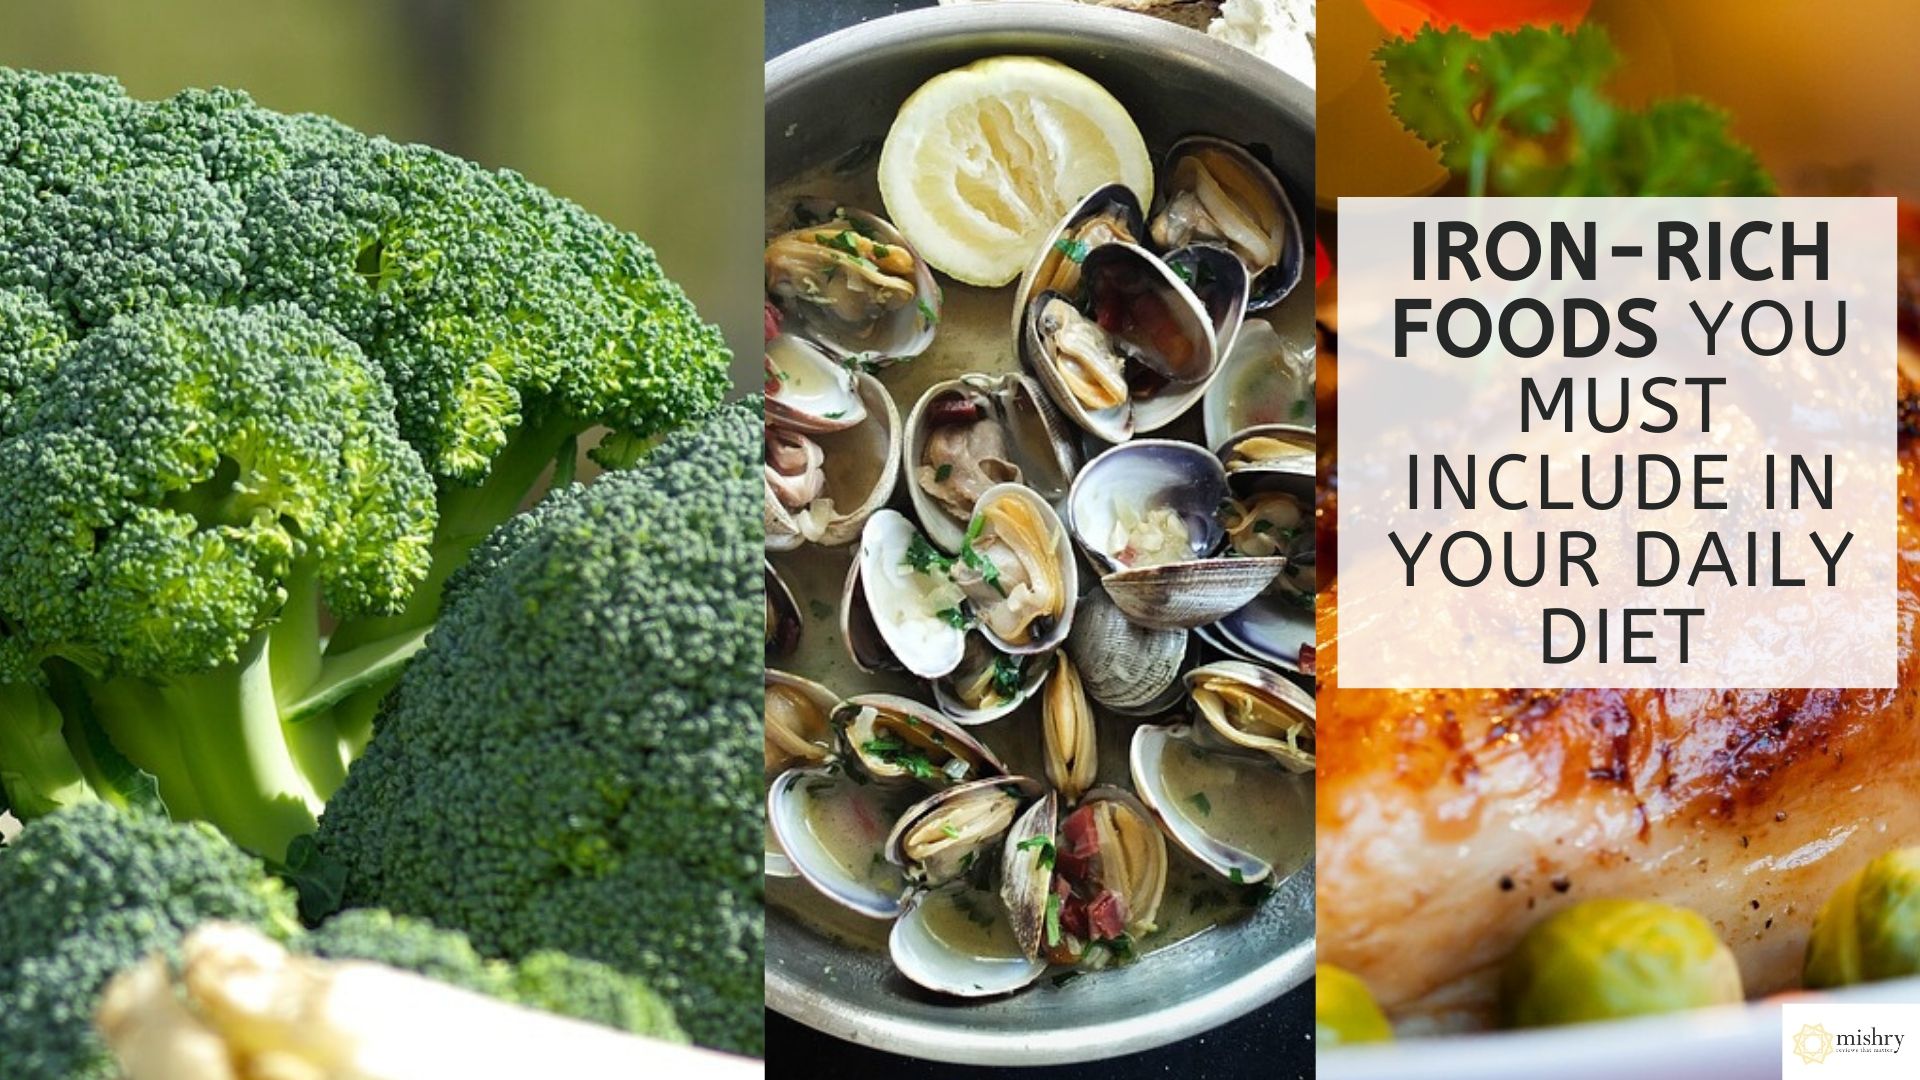 iron-rich foods you must include in your daily diet